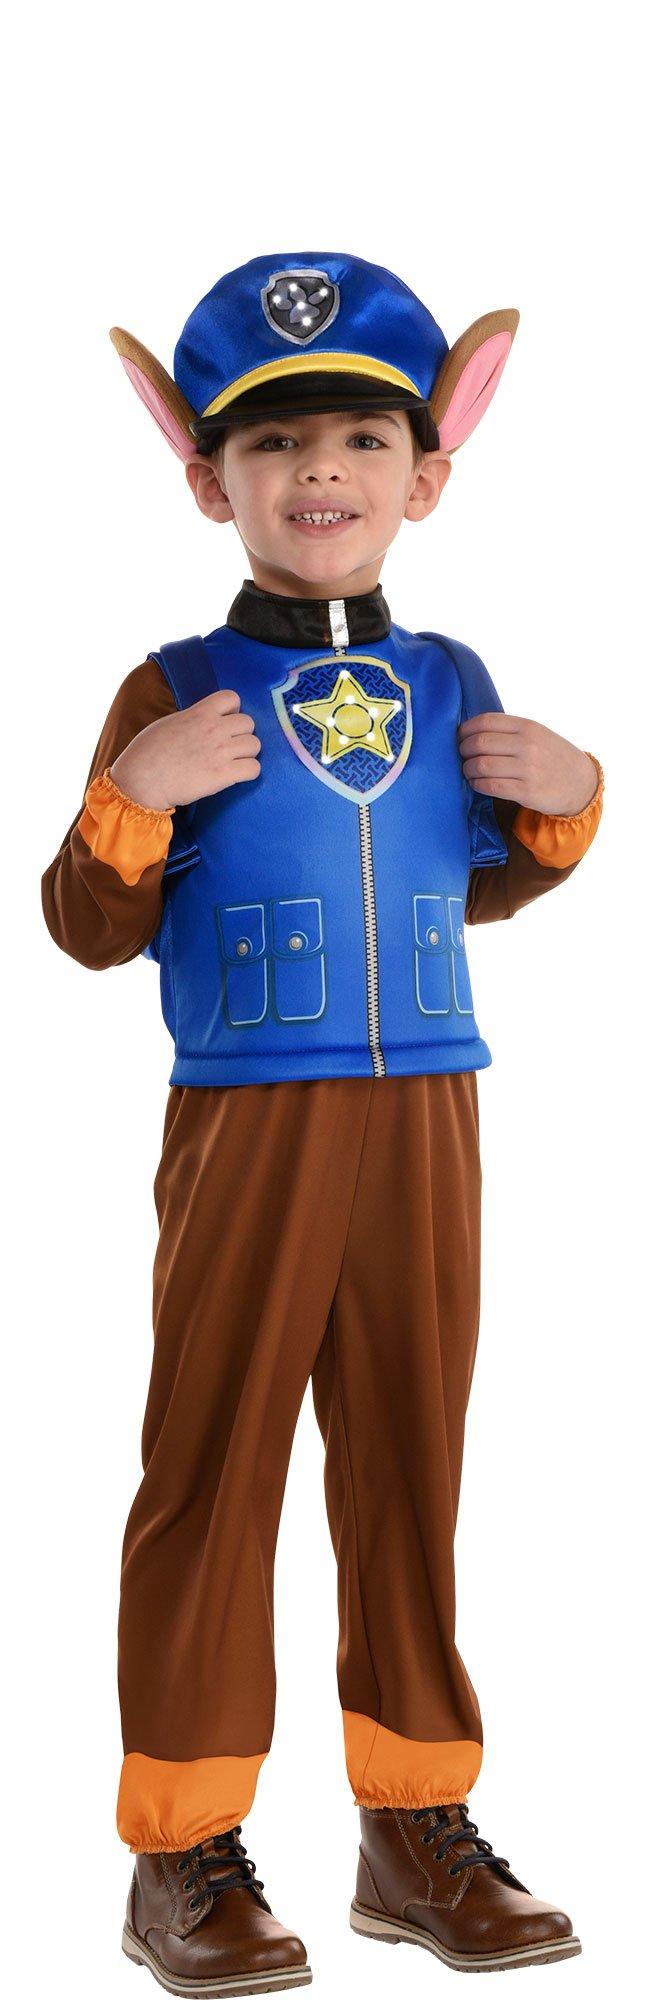 Kids' Chase Light-Up Costume - PAW Patrol | Party City